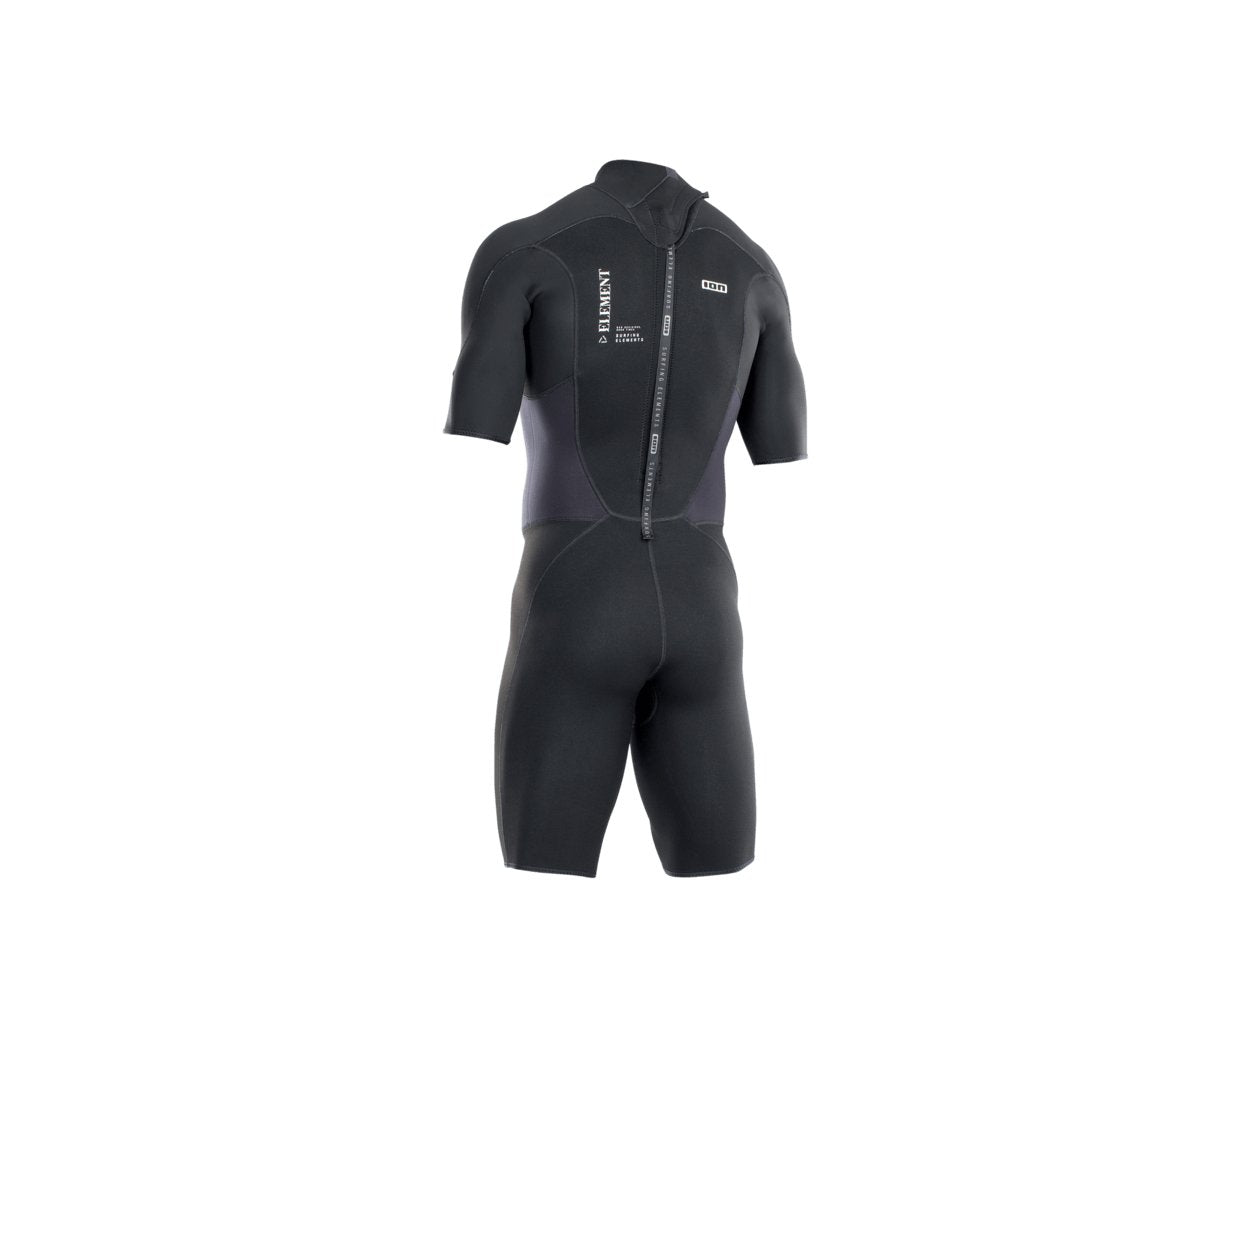 ION Men Wetsuit Element 2/2 Shorty Shortsleeve Back Zip 2022 - Worthing Watersports - 9008415951680 - Wetsuits - ION Water